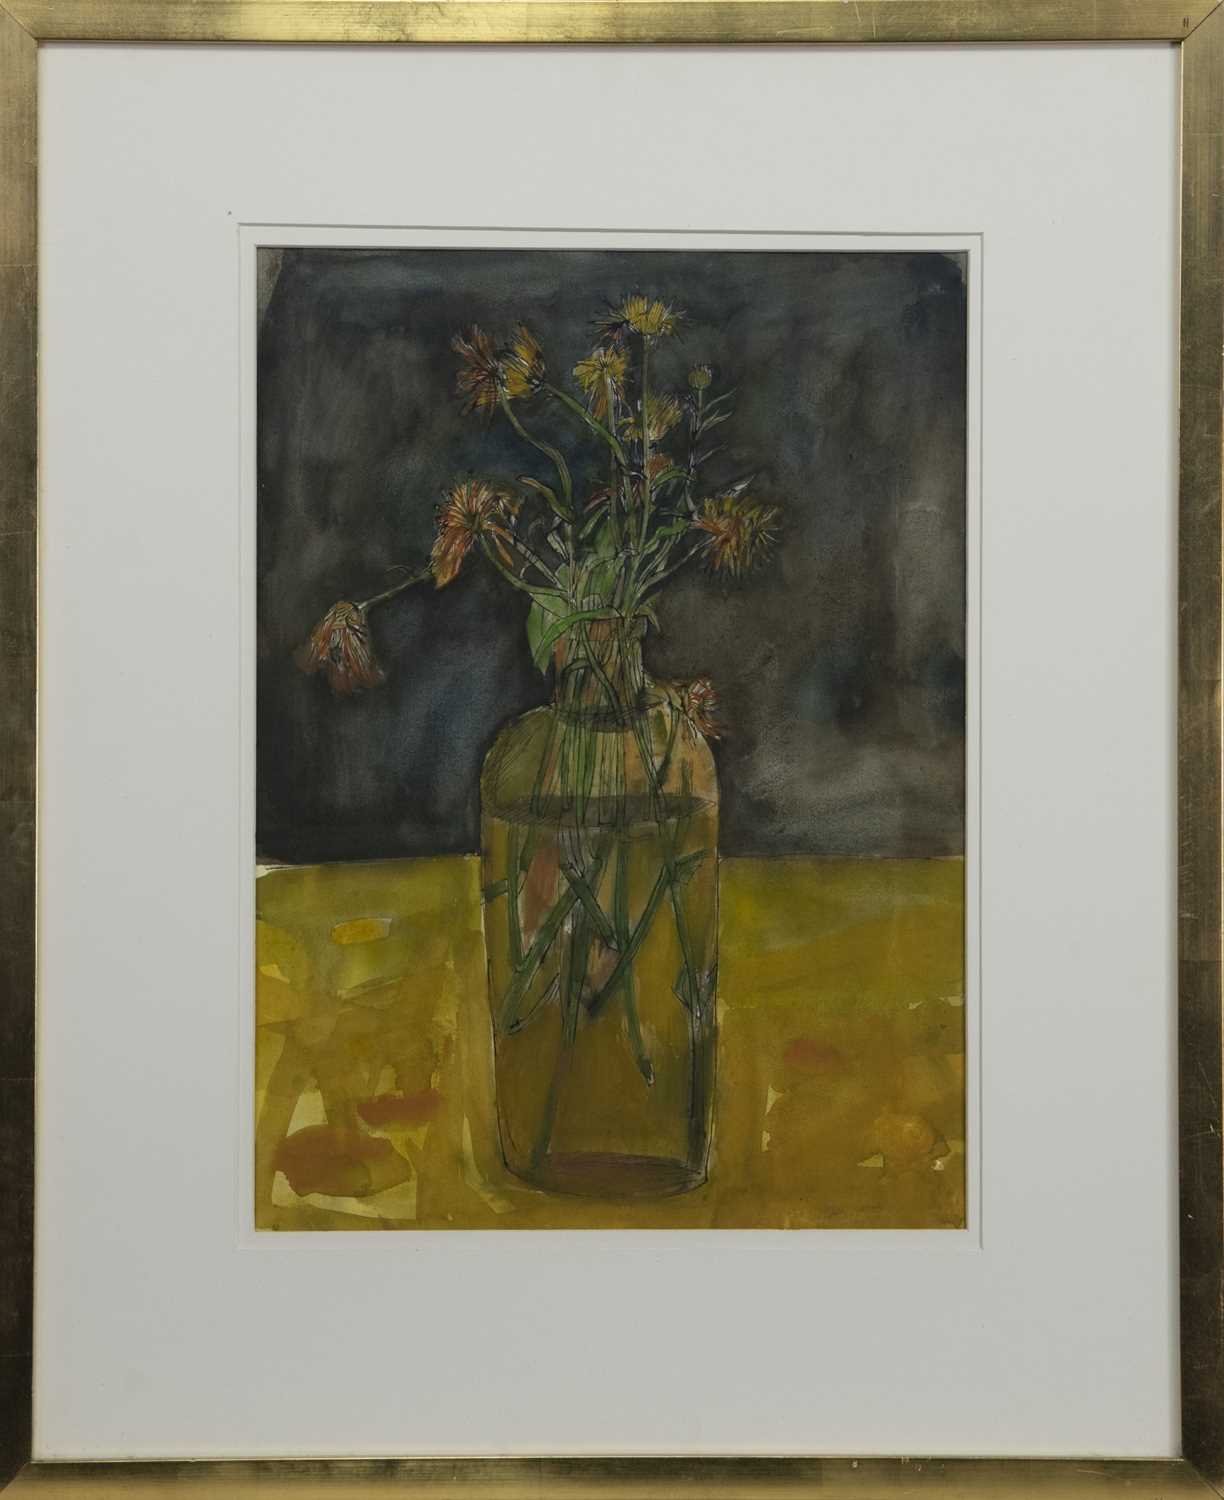 DYING MARIGOLDS, A WATERCOLOUR BY GLEN SCOULLER